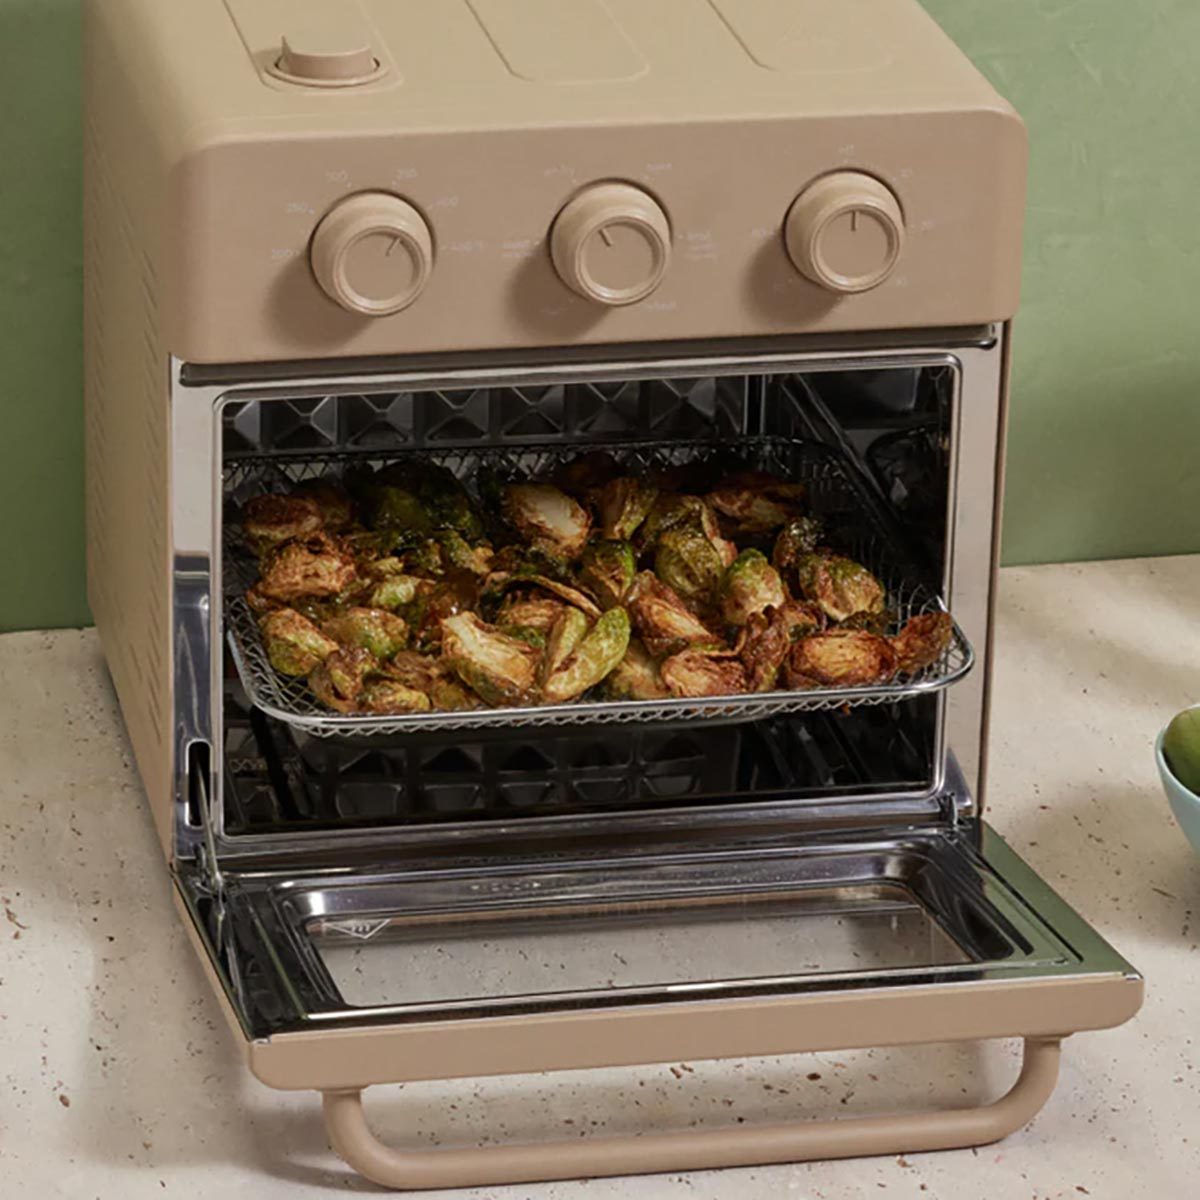 This mini toaster oven is the most adorable countertop appliance